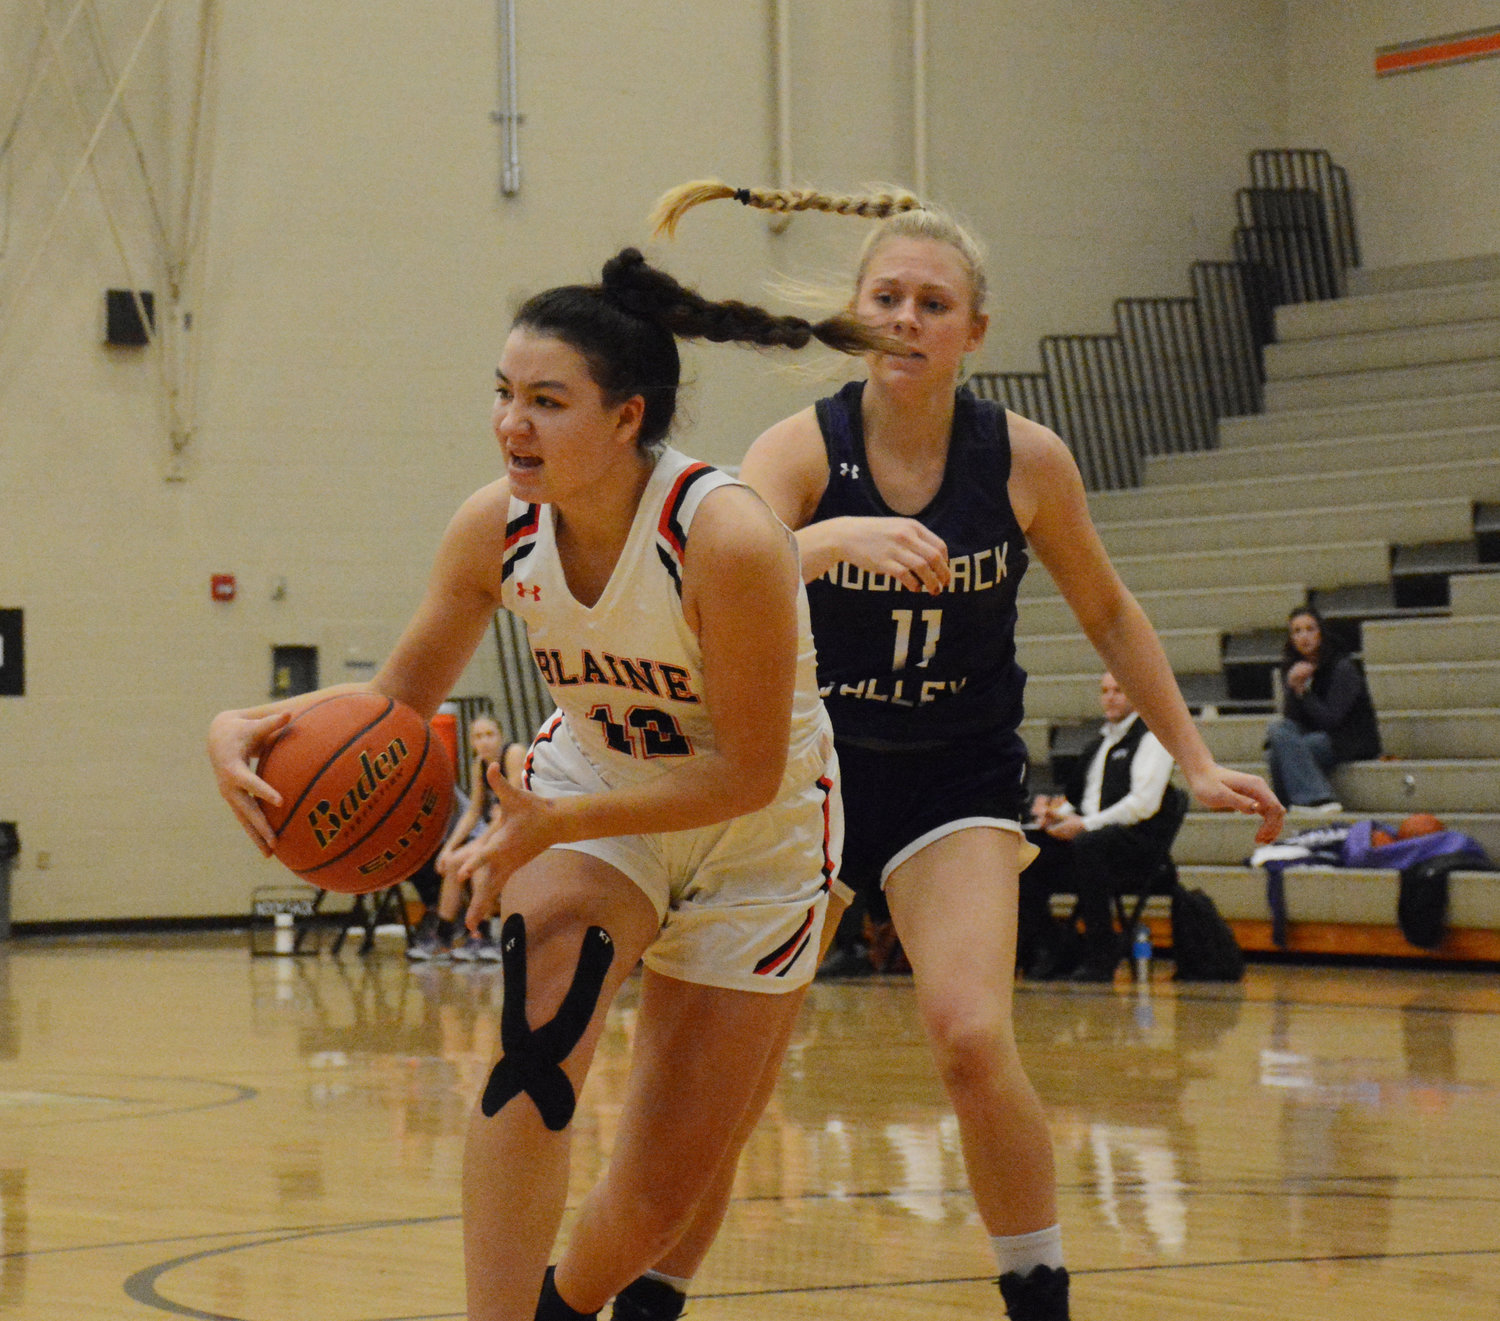 Aaliyah Bowman with the ball in the Lady Borderites’ 84-30 loss to Nooksack Valley in the Blaine High School gymnasium on January 2.